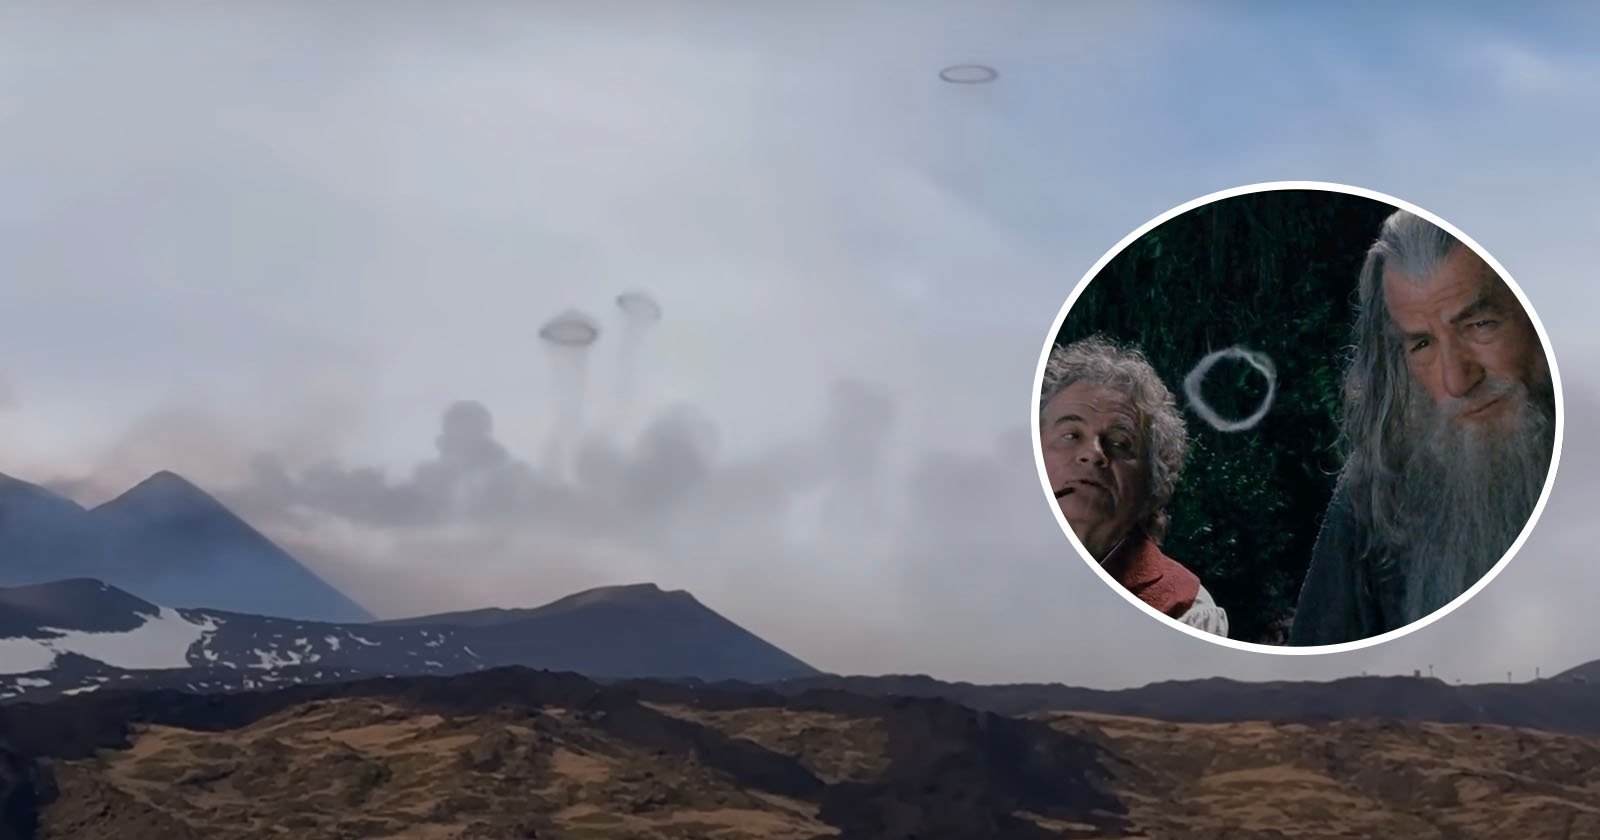 Composite image featuring a landscape with Mount Etna and three flying saucers in the sky, and an inset showing a close-up of gandalf the grey from "the lord of the rings," looking contemplative.